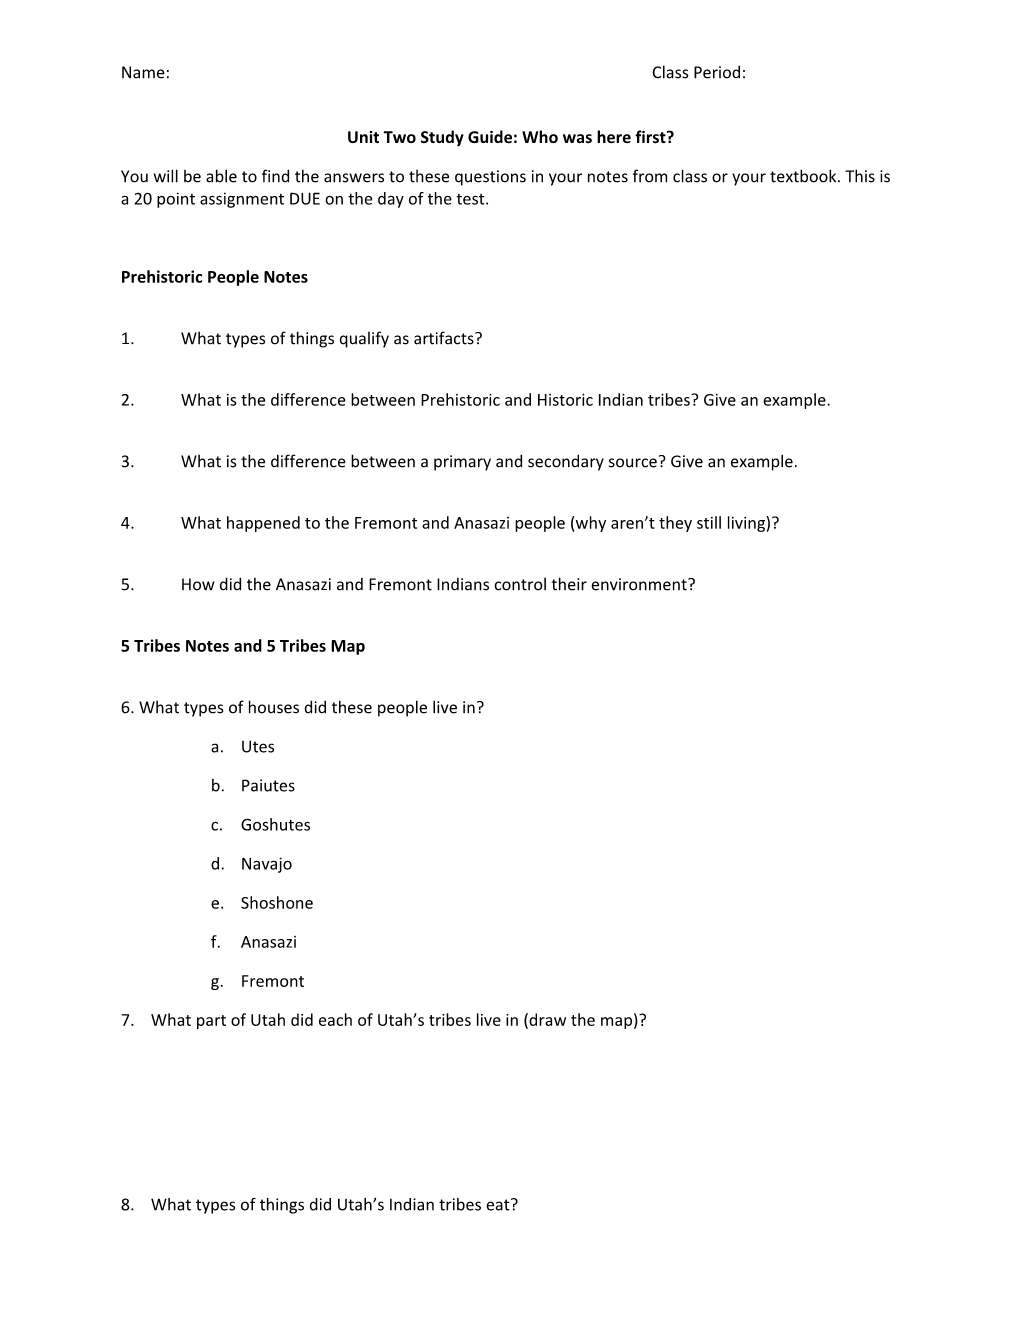 Unit Two Study Guide: Who Was Here First?